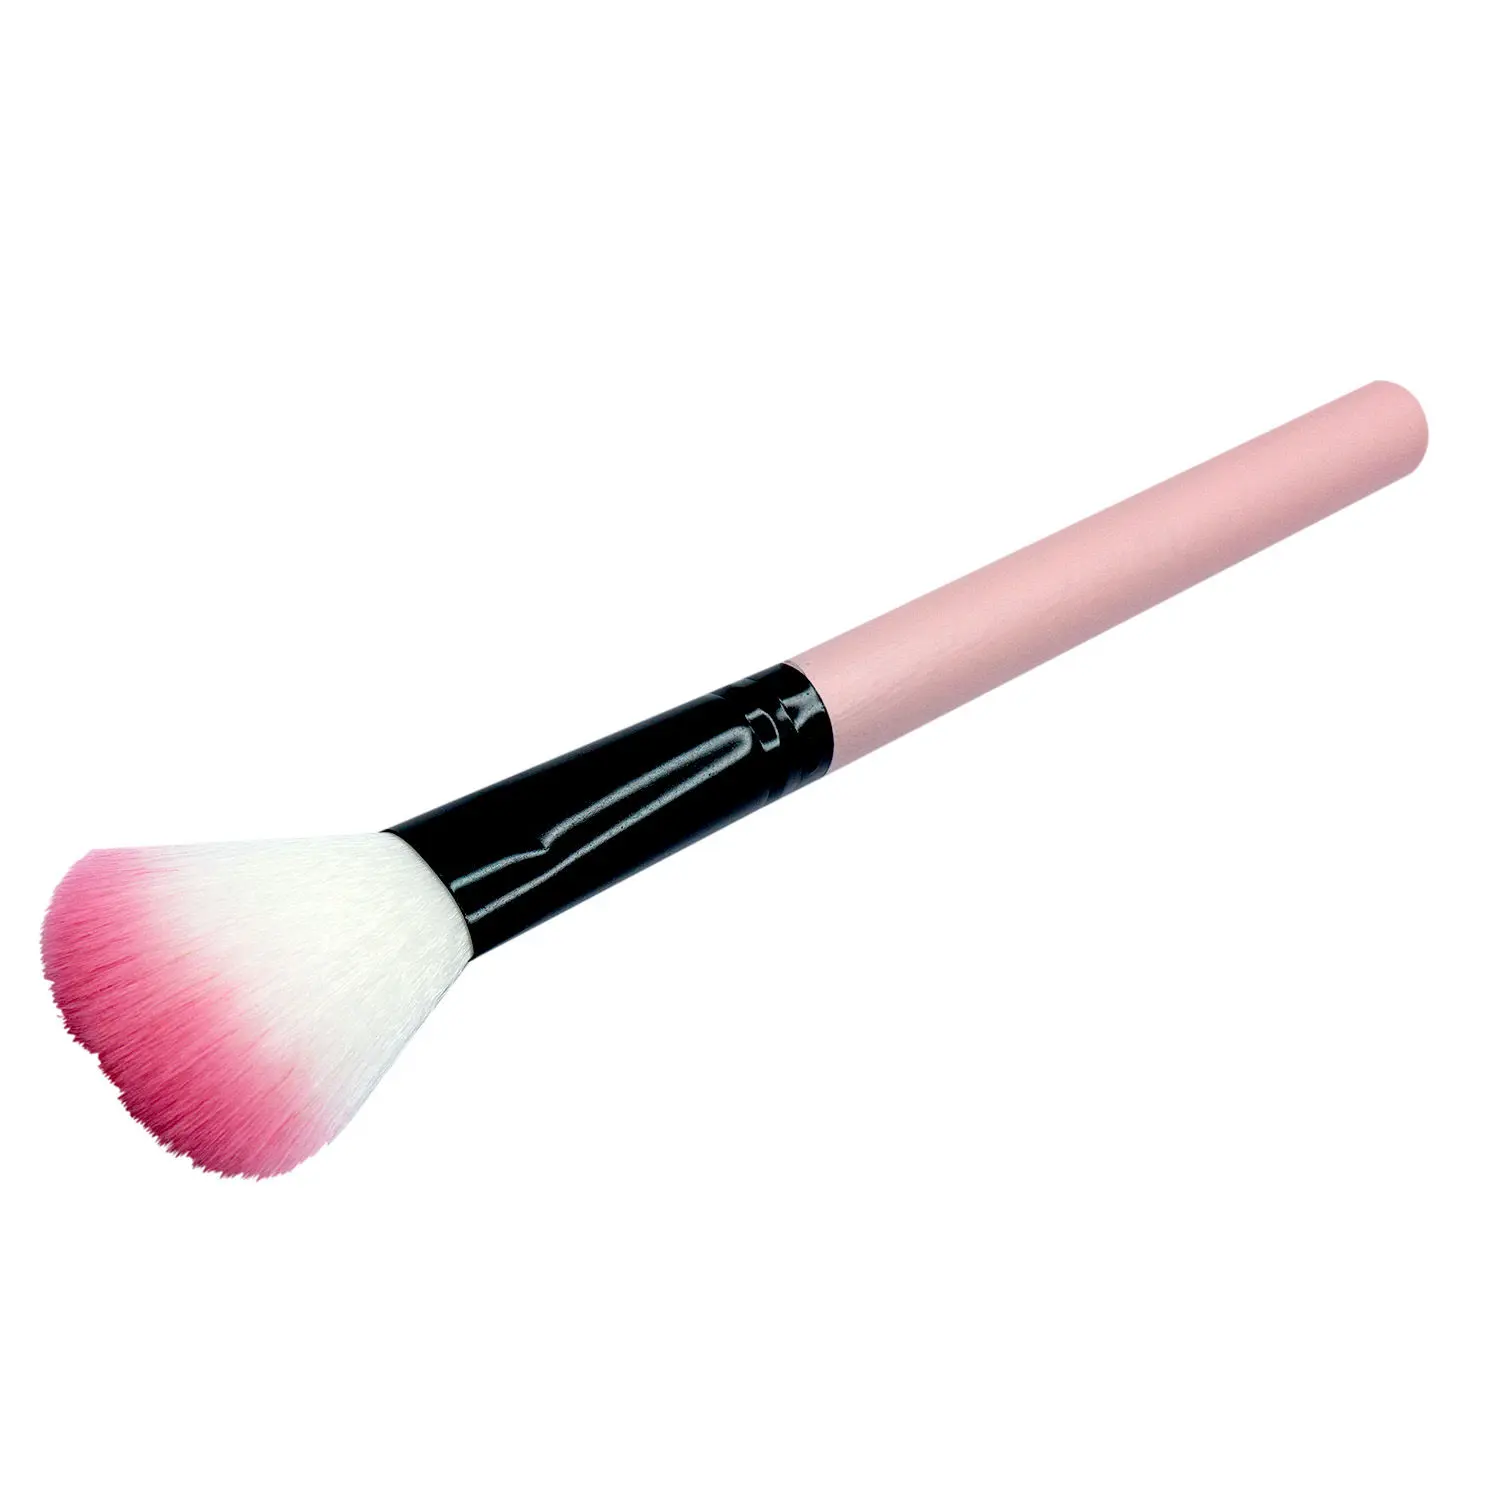 Beautiliss Professional Blush Brush( Color may vary)